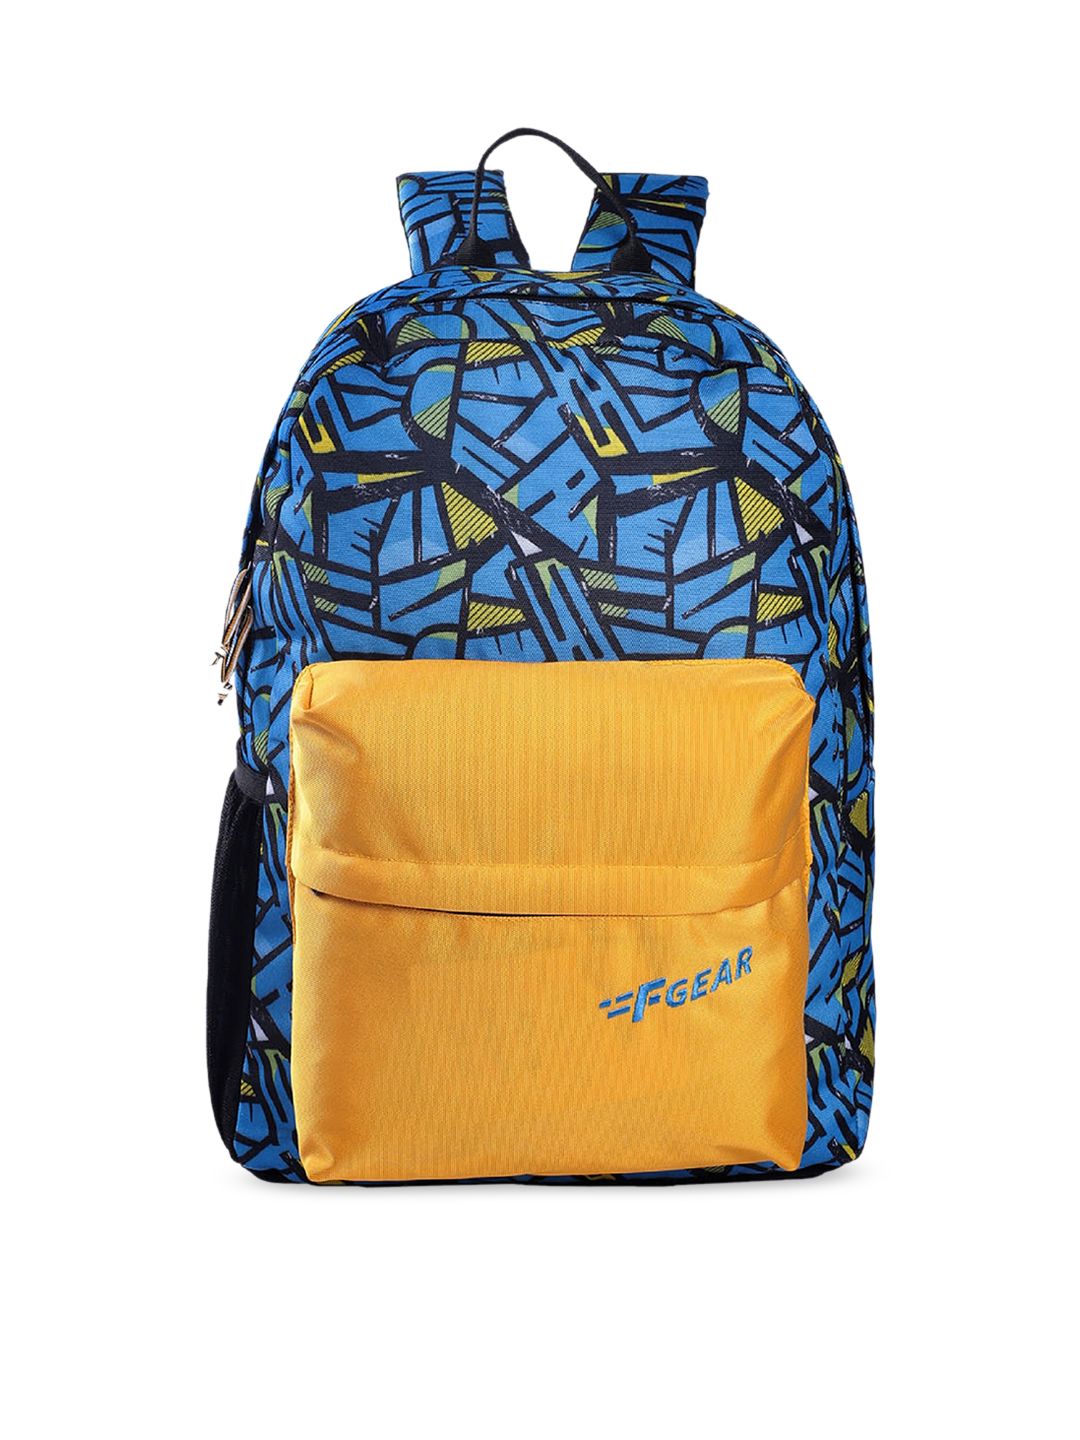 F Gear Unisex Blue & Yellow Colourblocked Backpack Price in India